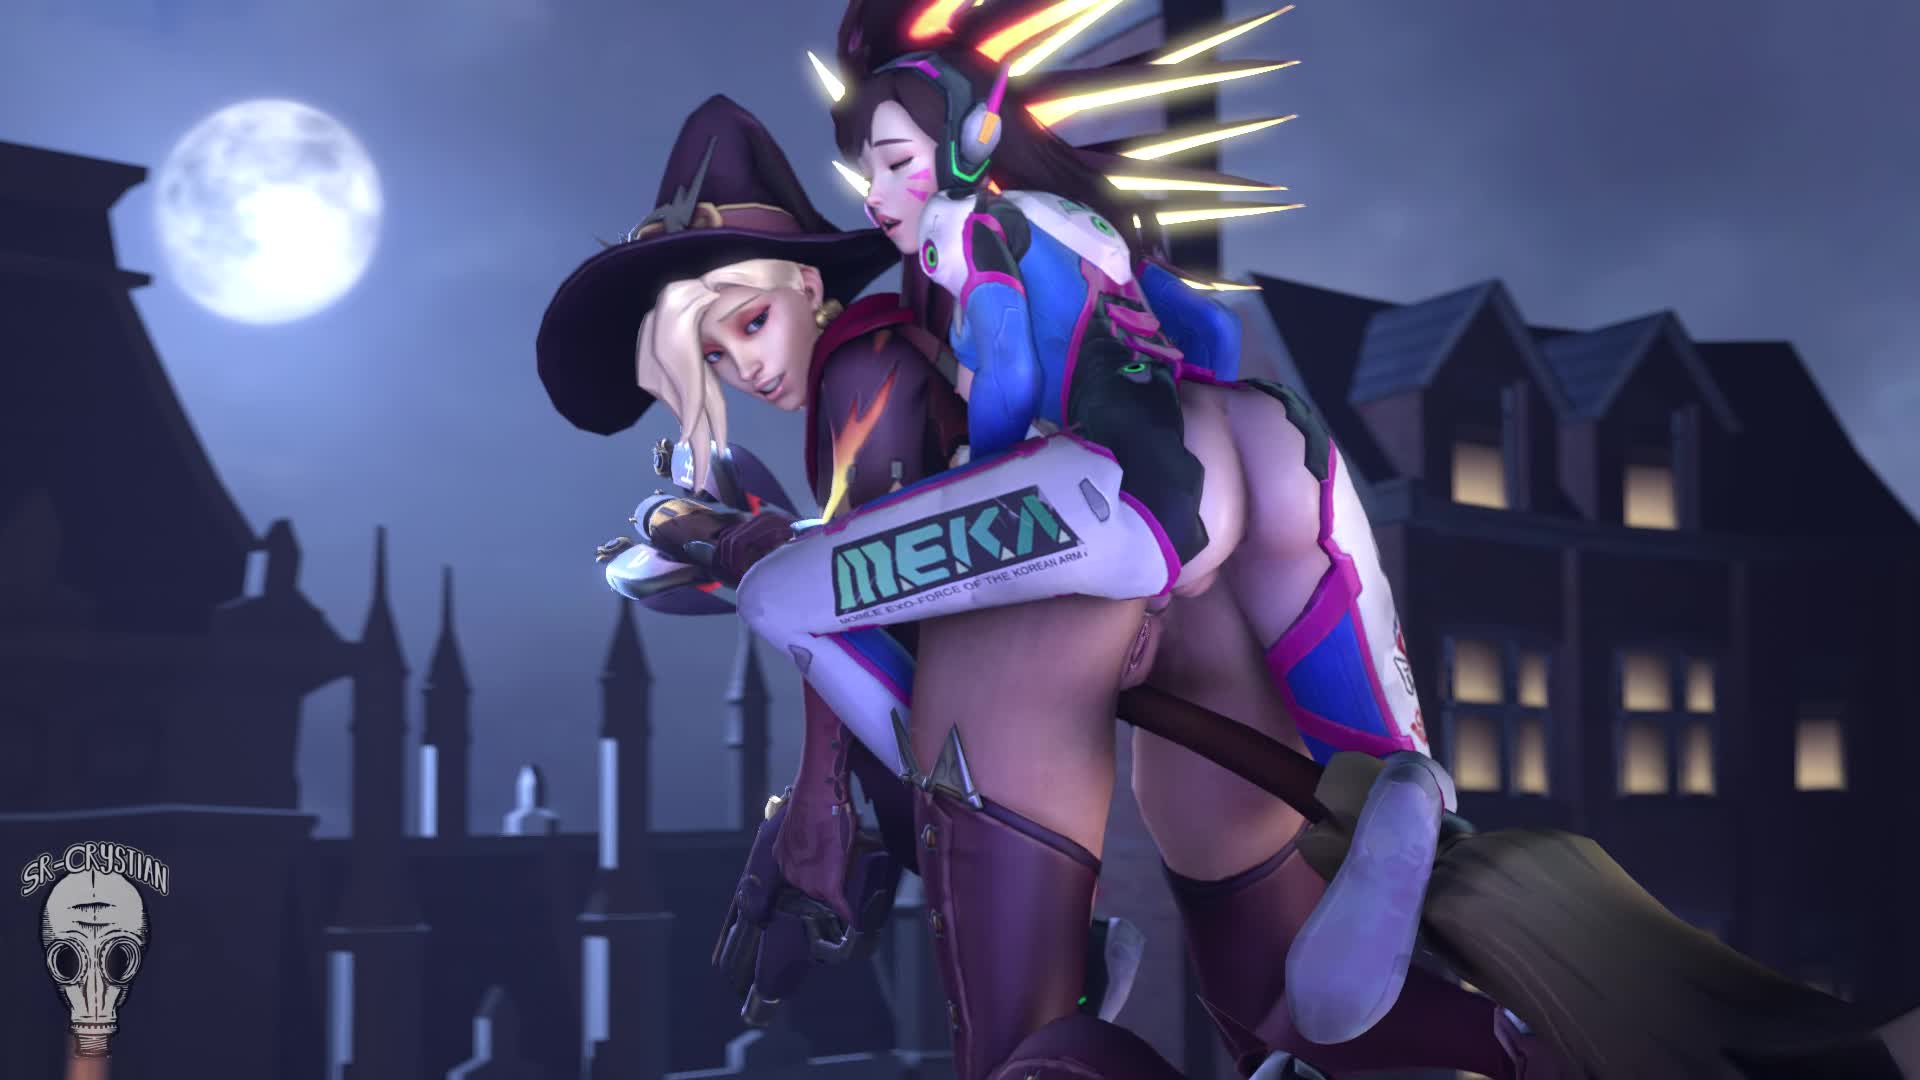 Witch mercy loves rough fucking xxx pic